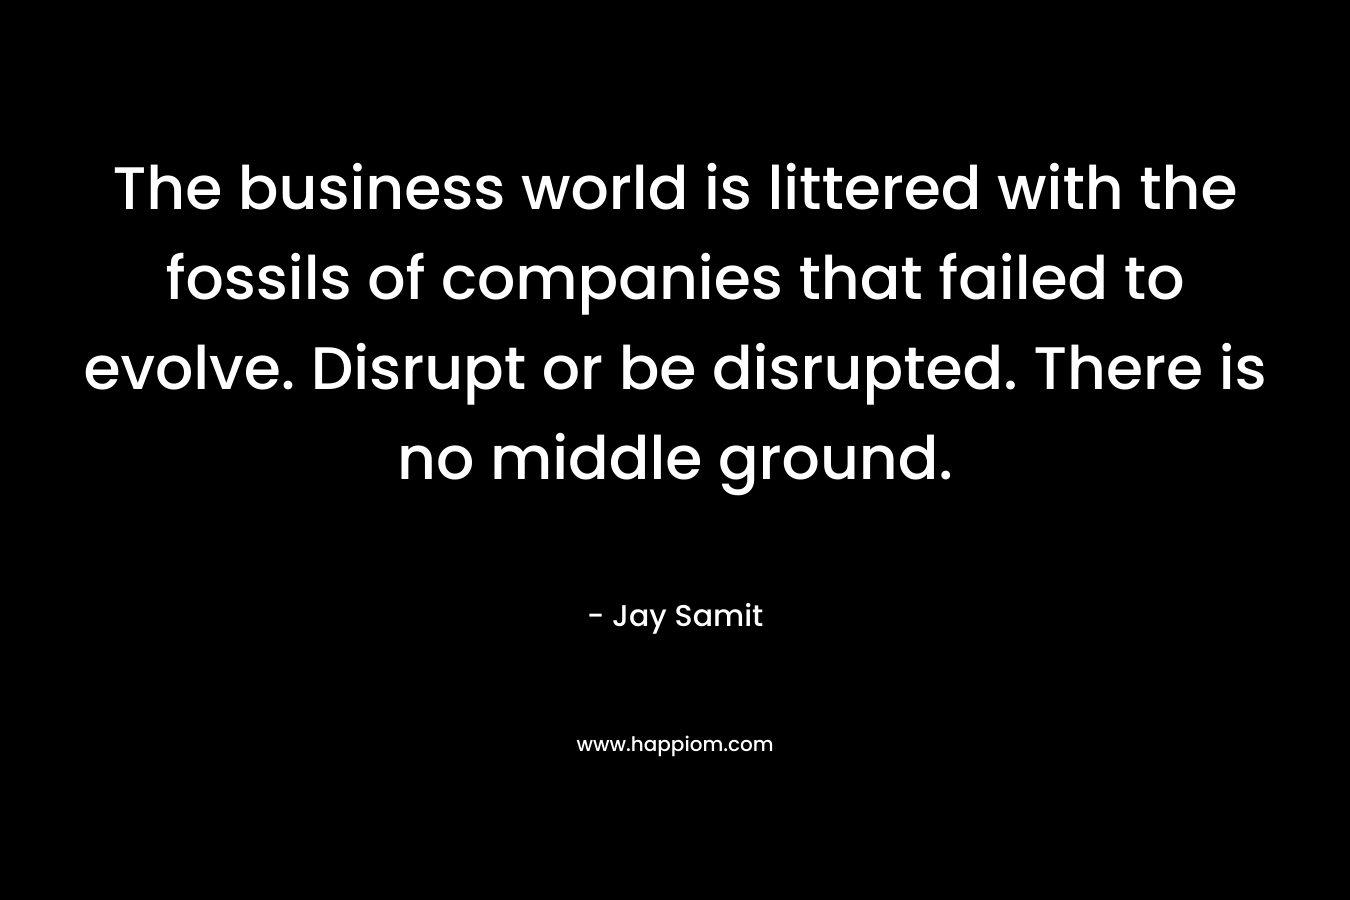 The business world is littered with the fossils of companies that failed to evolve. Disrupt or be disrupted. There is no middle ground. – Jay Samit